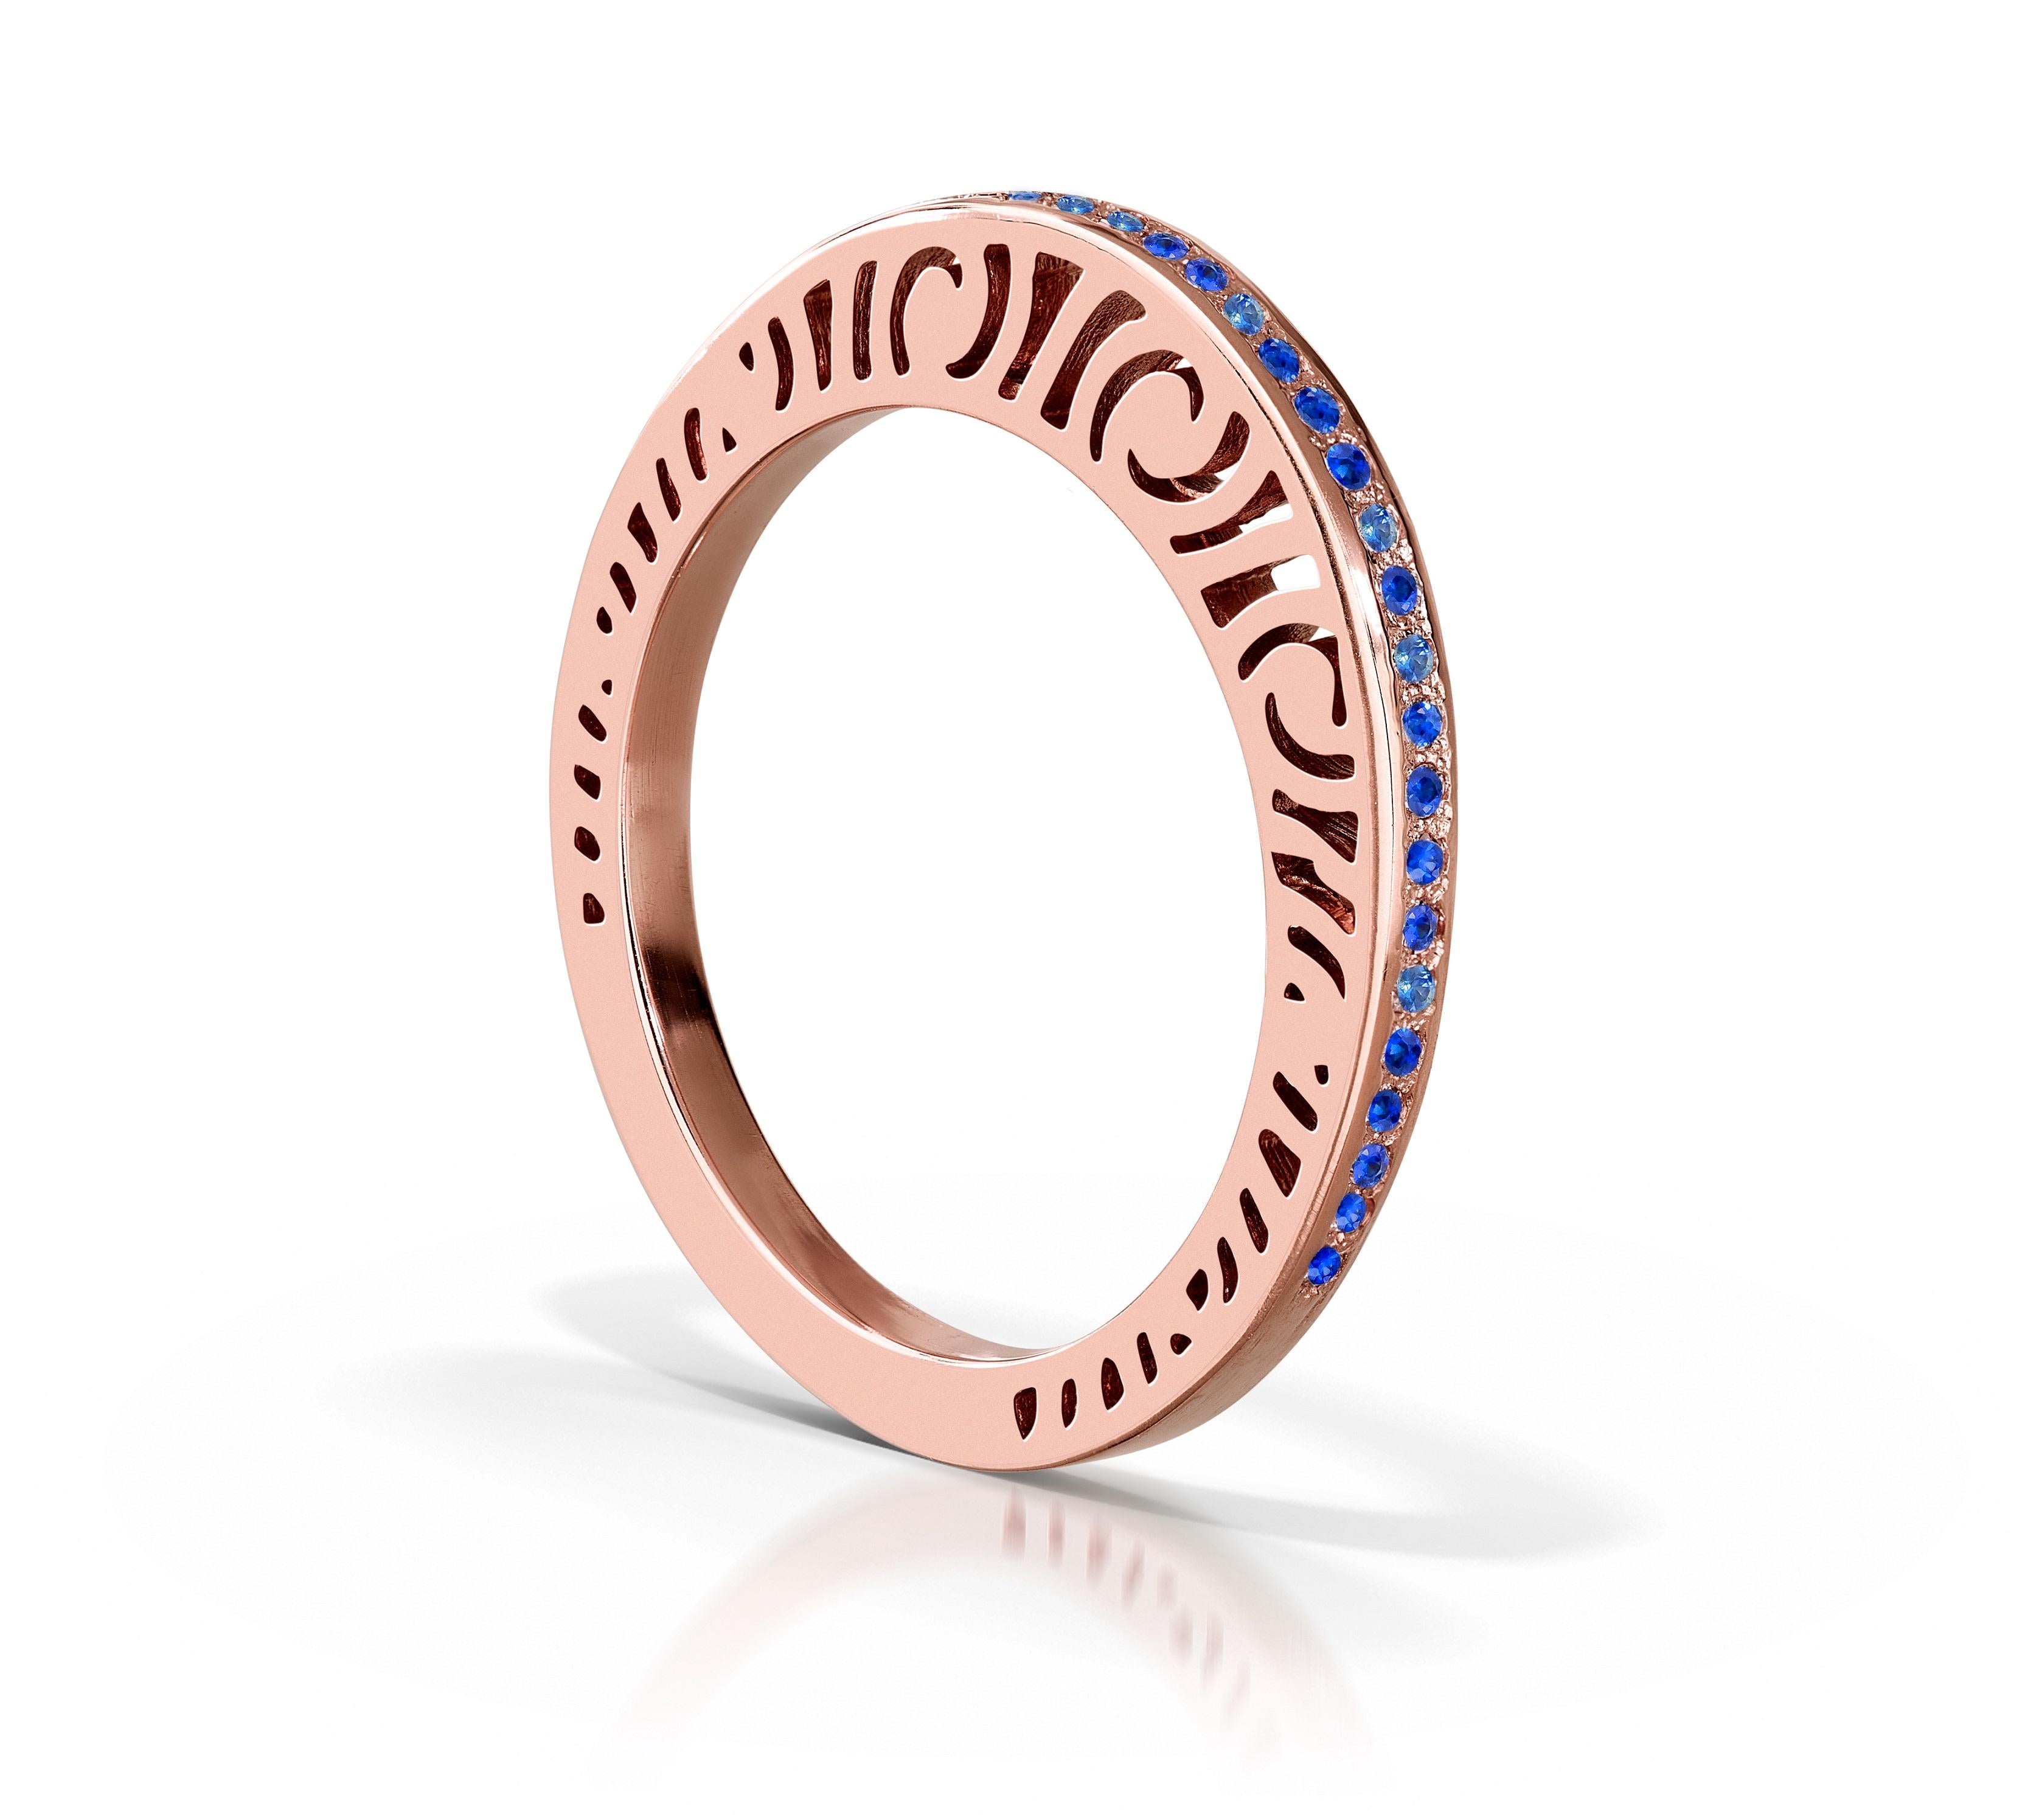 The thinnest of the Shooting Star's ring collection is the Orion Stacking Ring. It is 2 mm wide and features yellow gold with diamonds or gold with sapphires. The Orion ring is sleek, modern and bold in it's simple shape. It has thirty-three 0.9mm